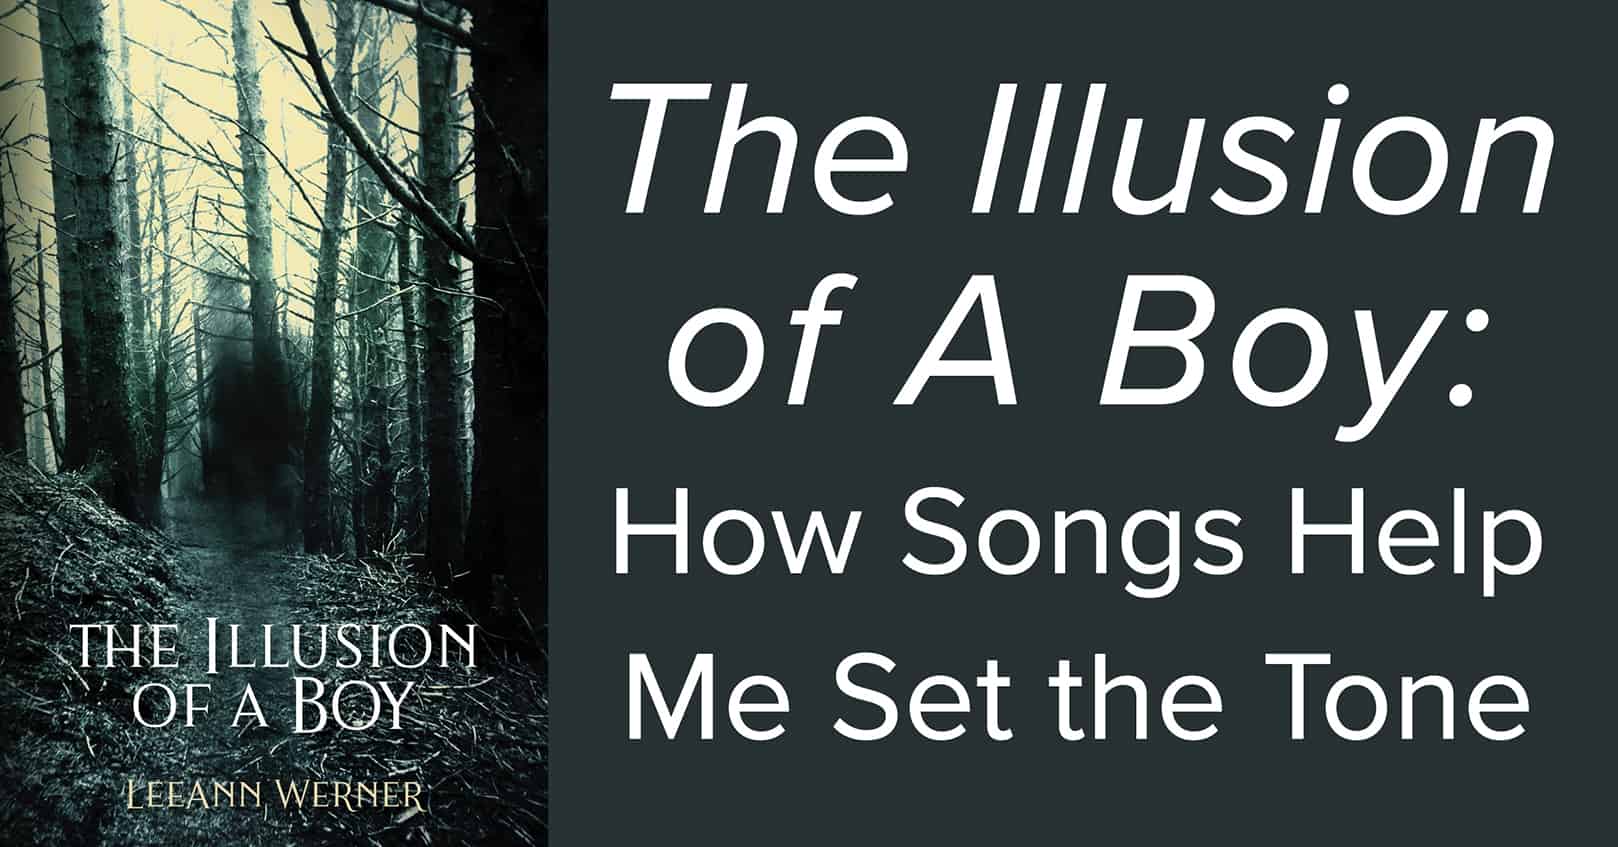 Illusions of a boy songs in books